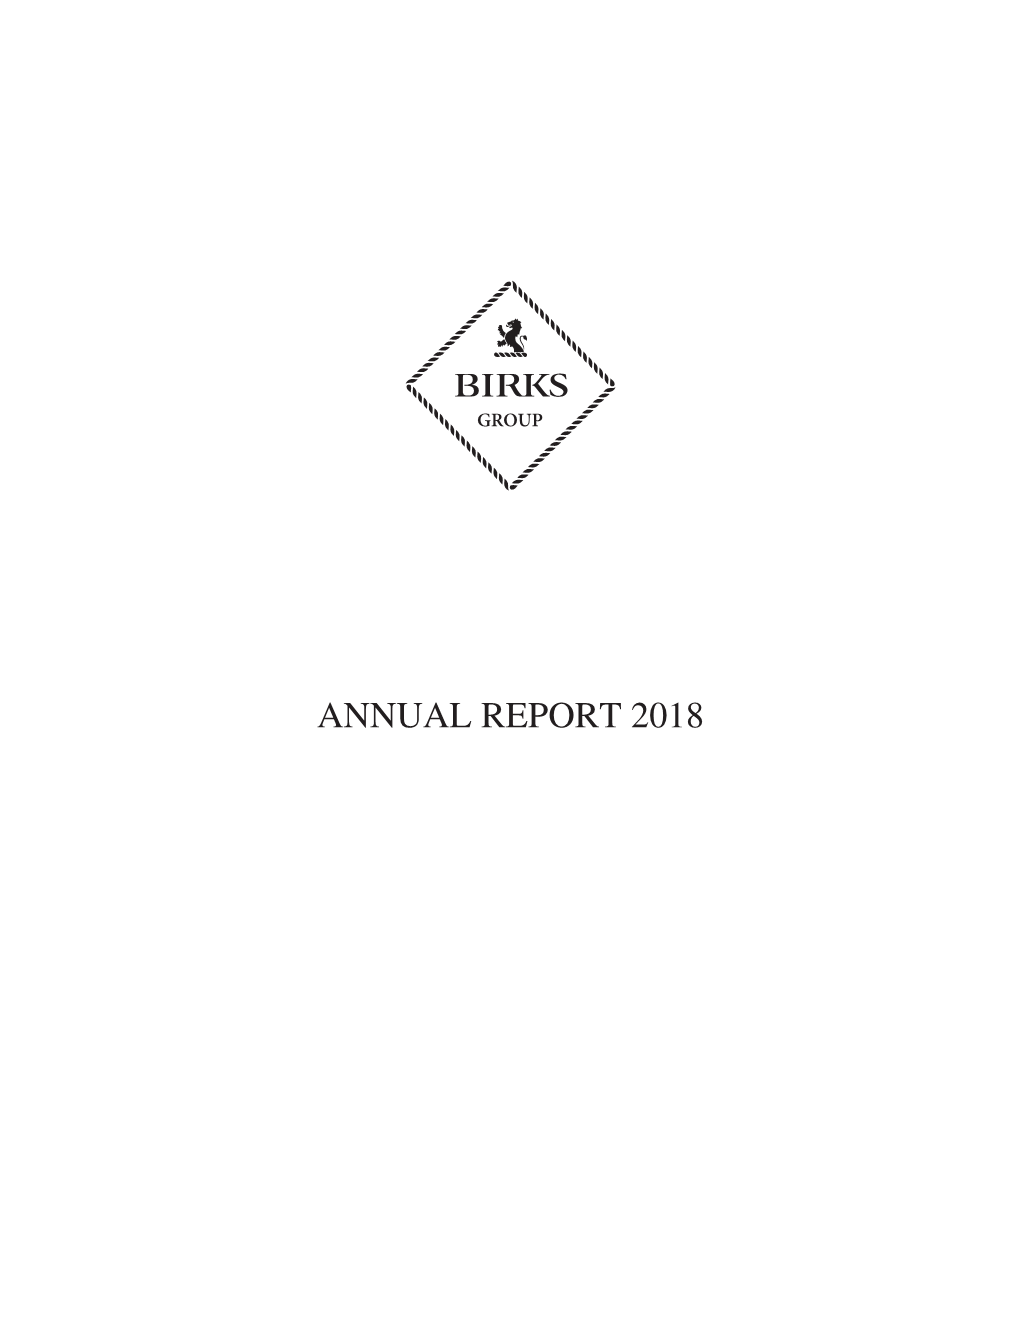 Birks Group 2018 Annual Report